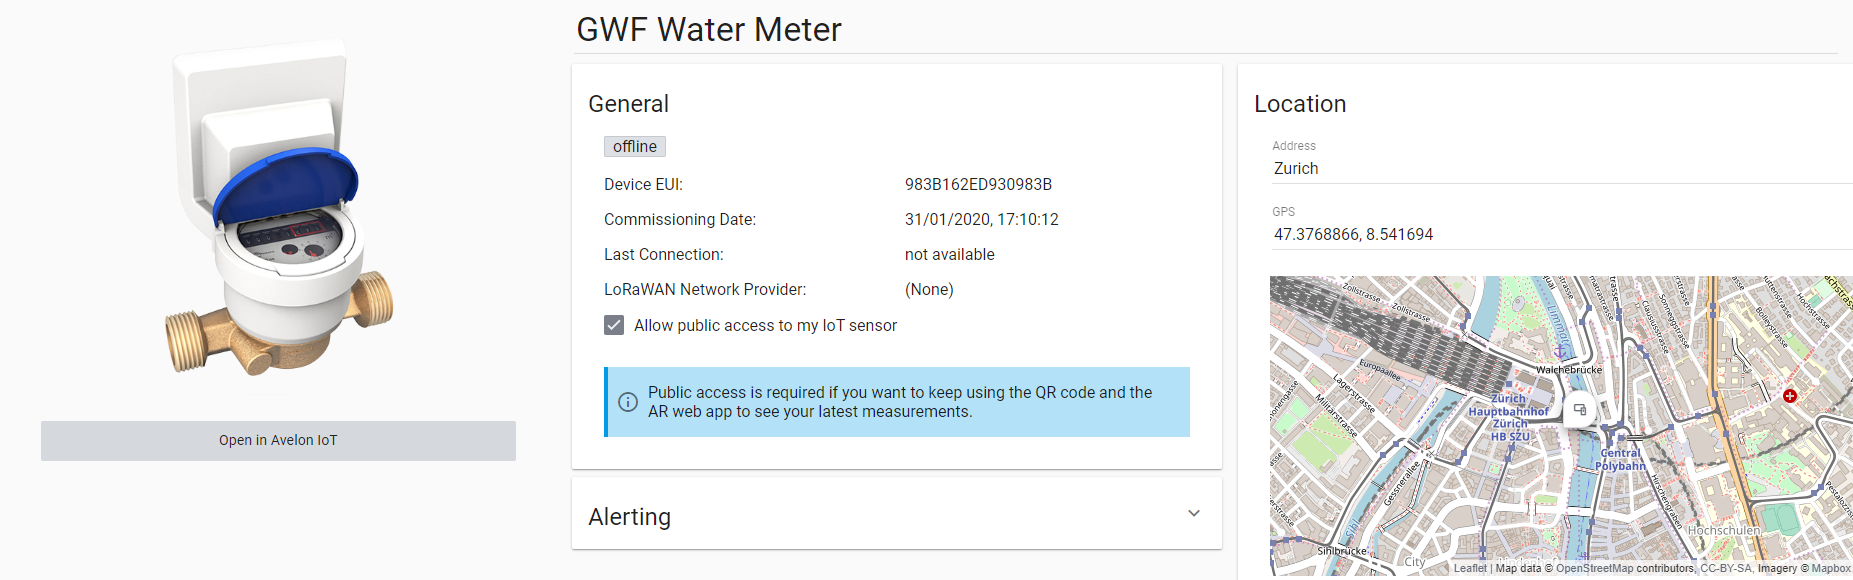 ../../_images/water-meter-configuration.png